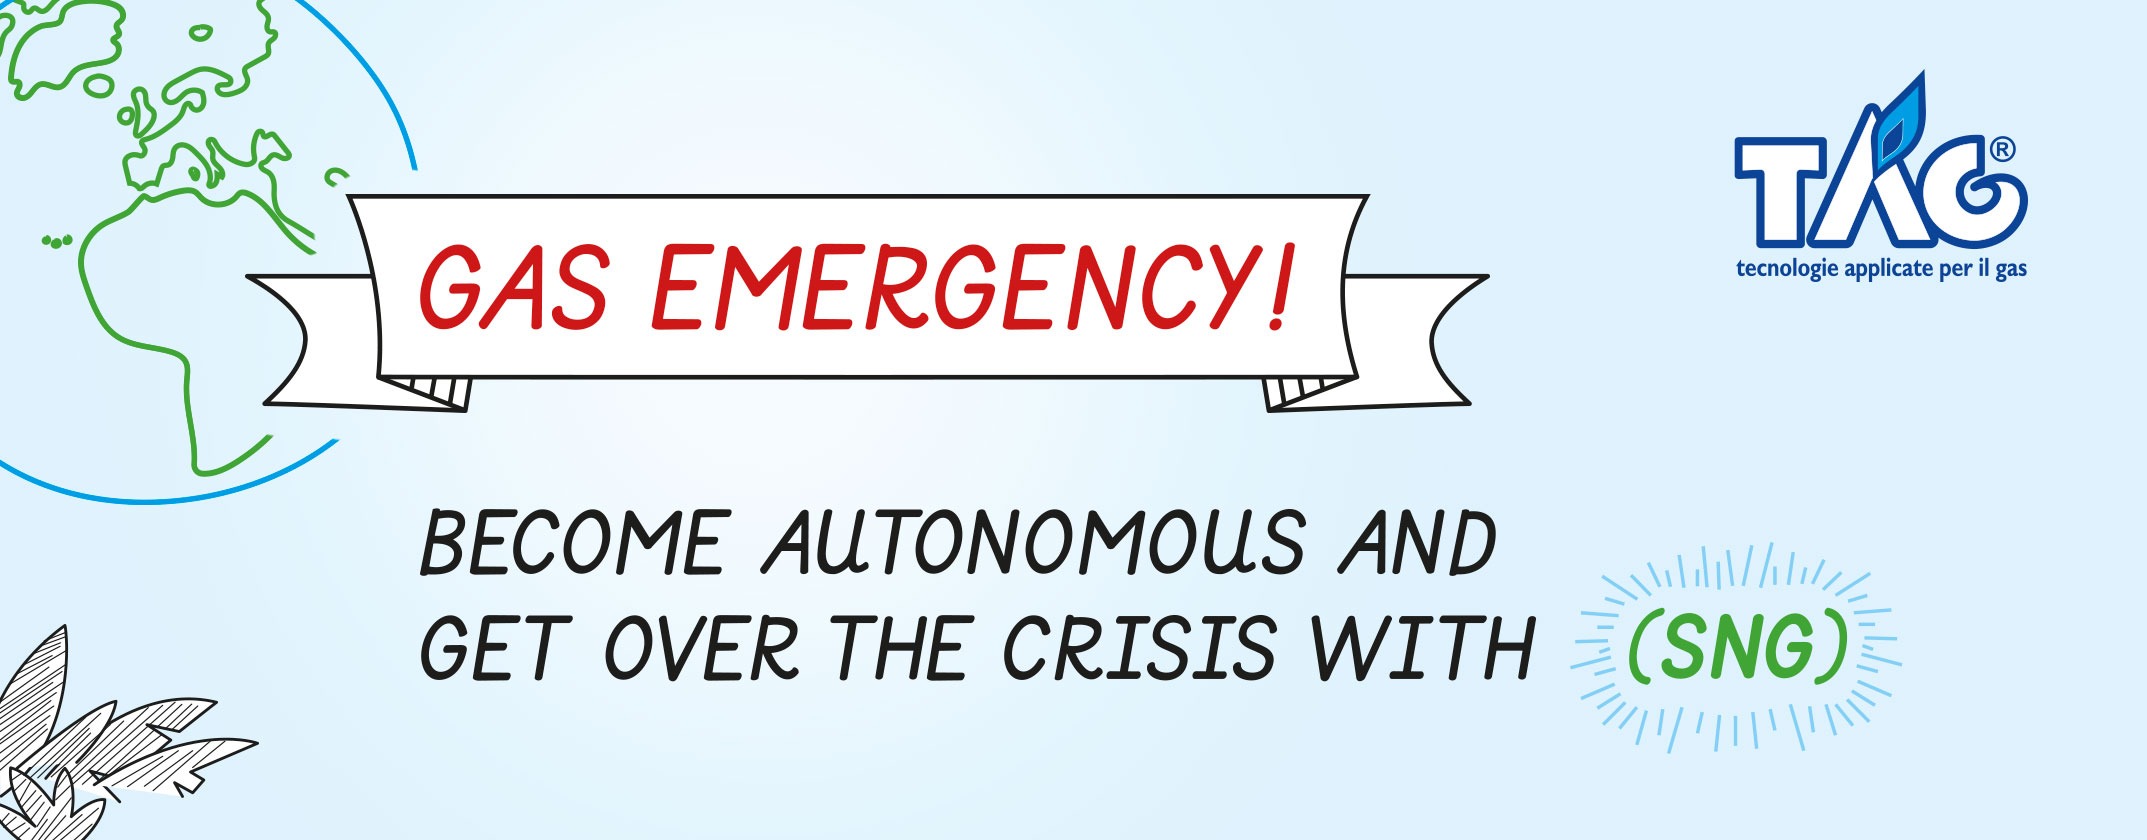 Gas Emergency - Become autonomousand get over the crisis with SNG!